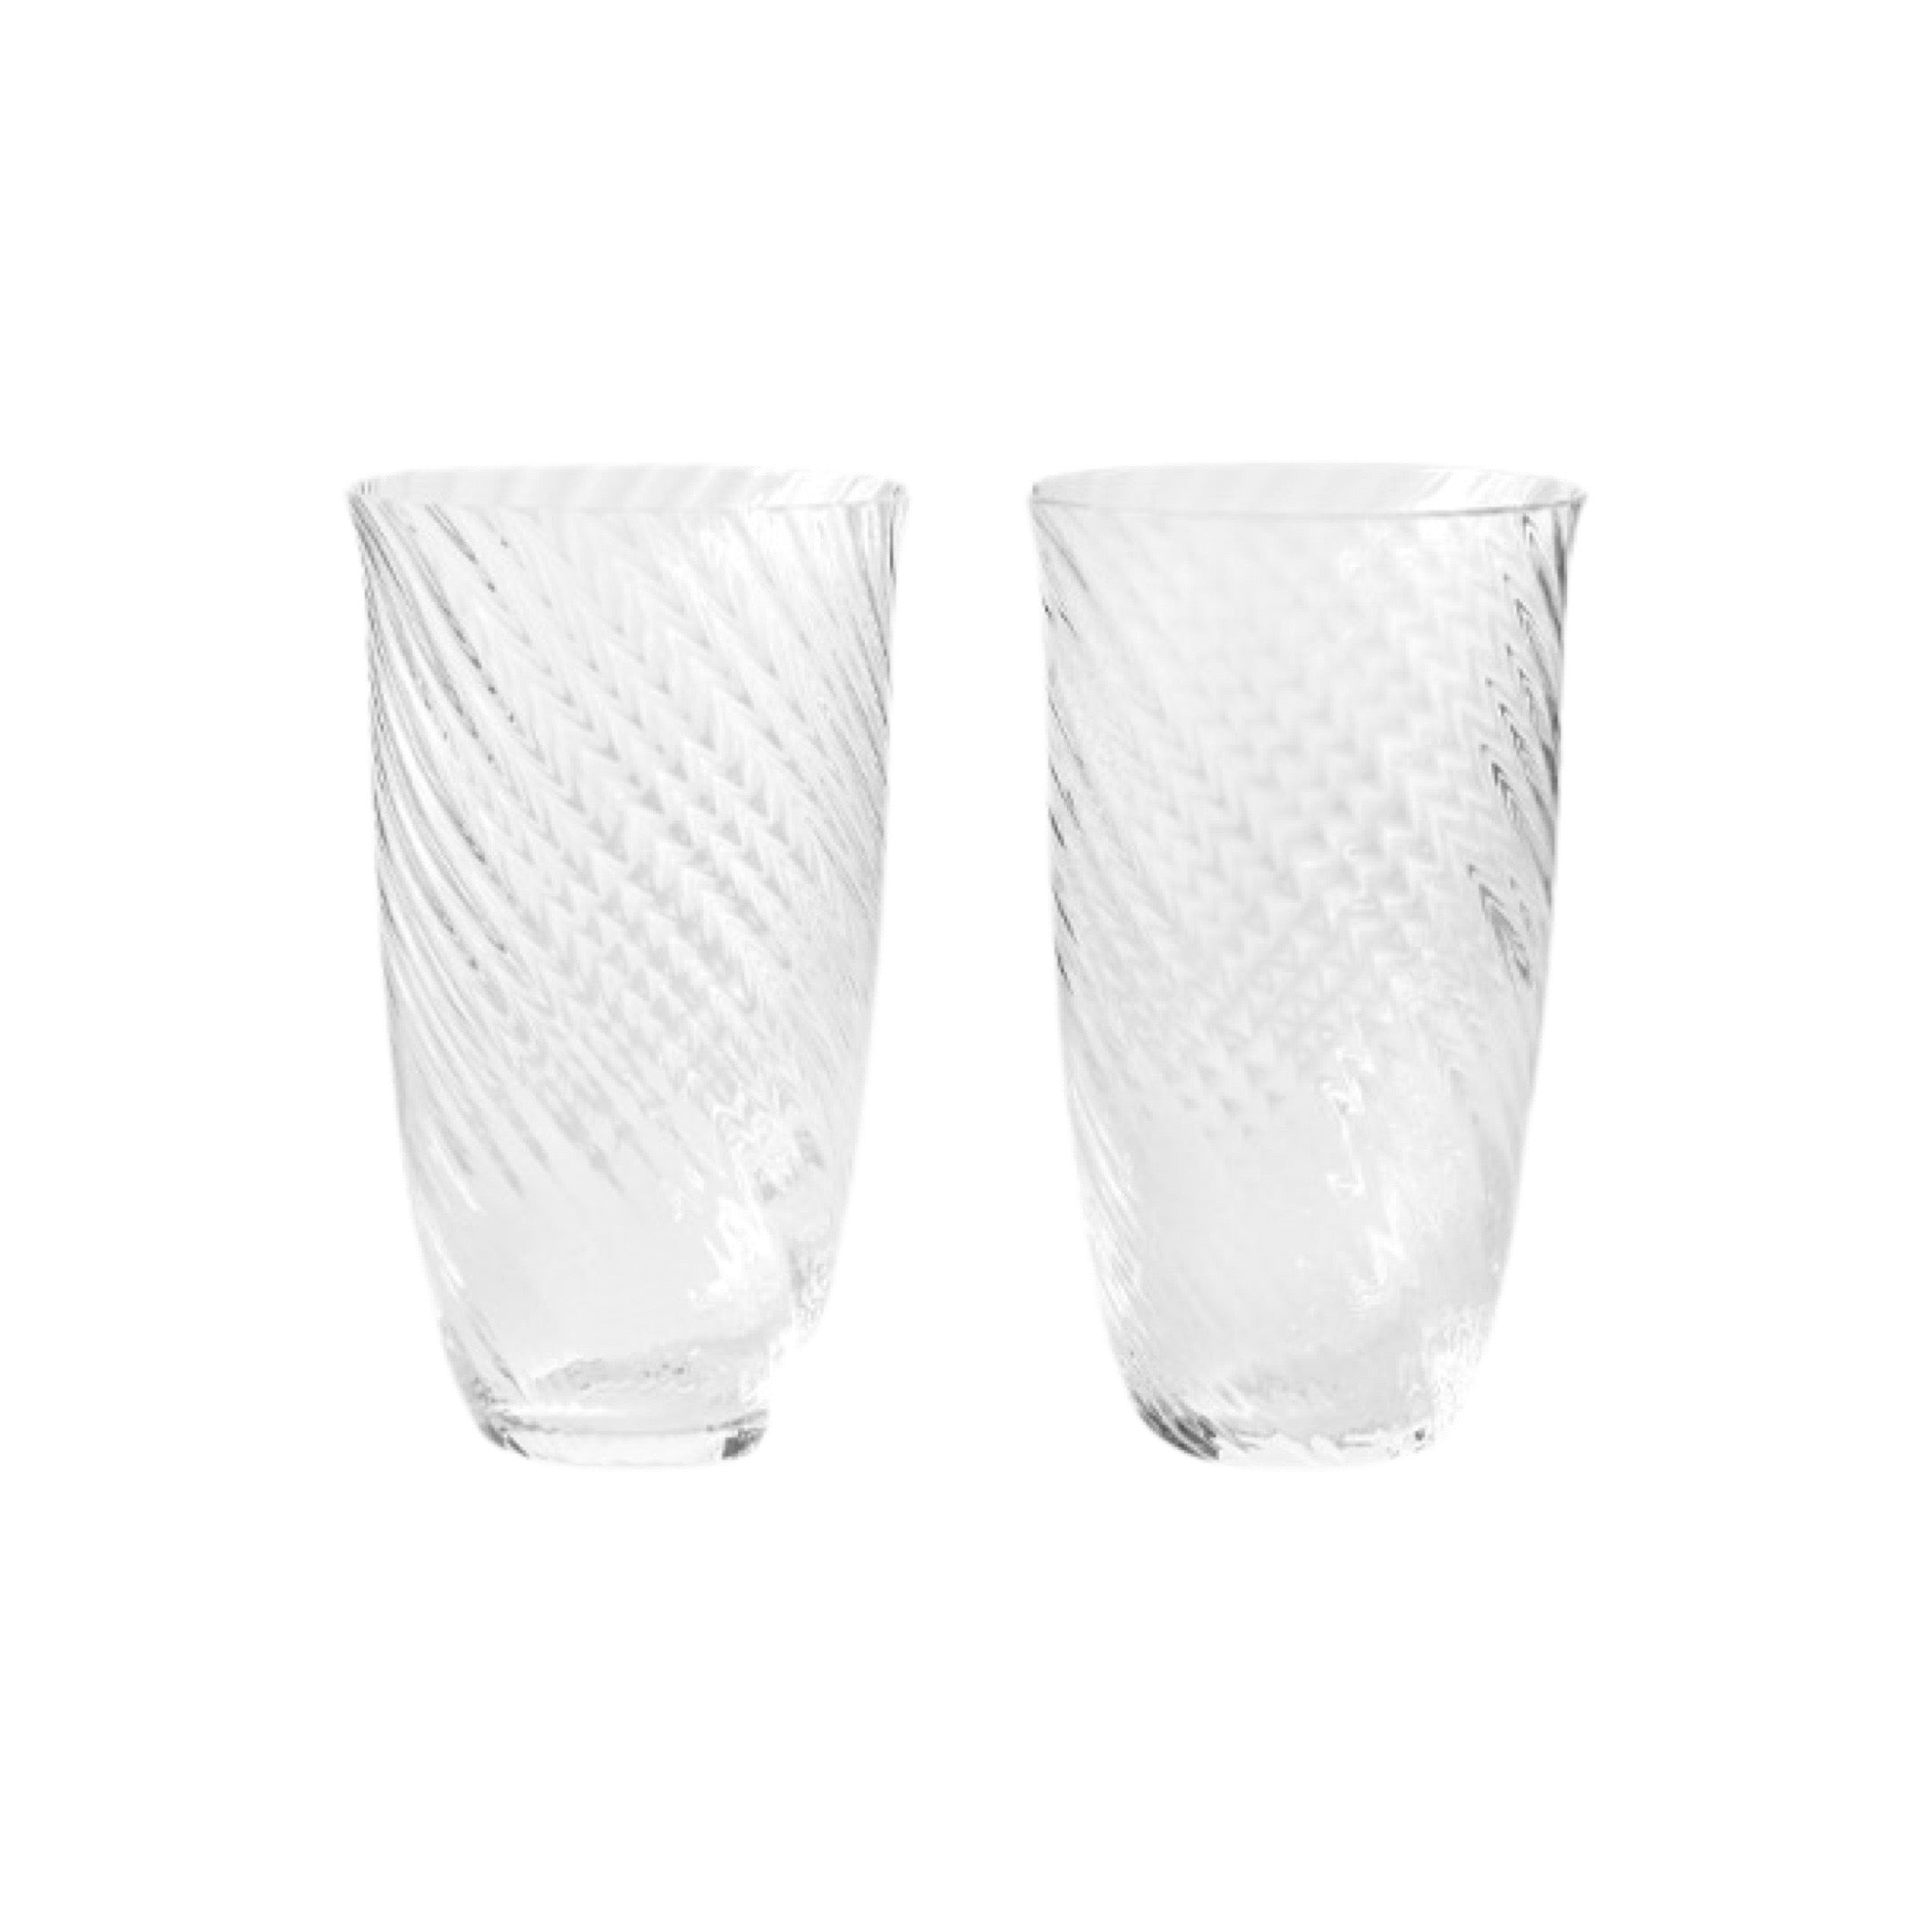 &Tradition SC60 Collect Drinking Glass 165ml (Set of 2)